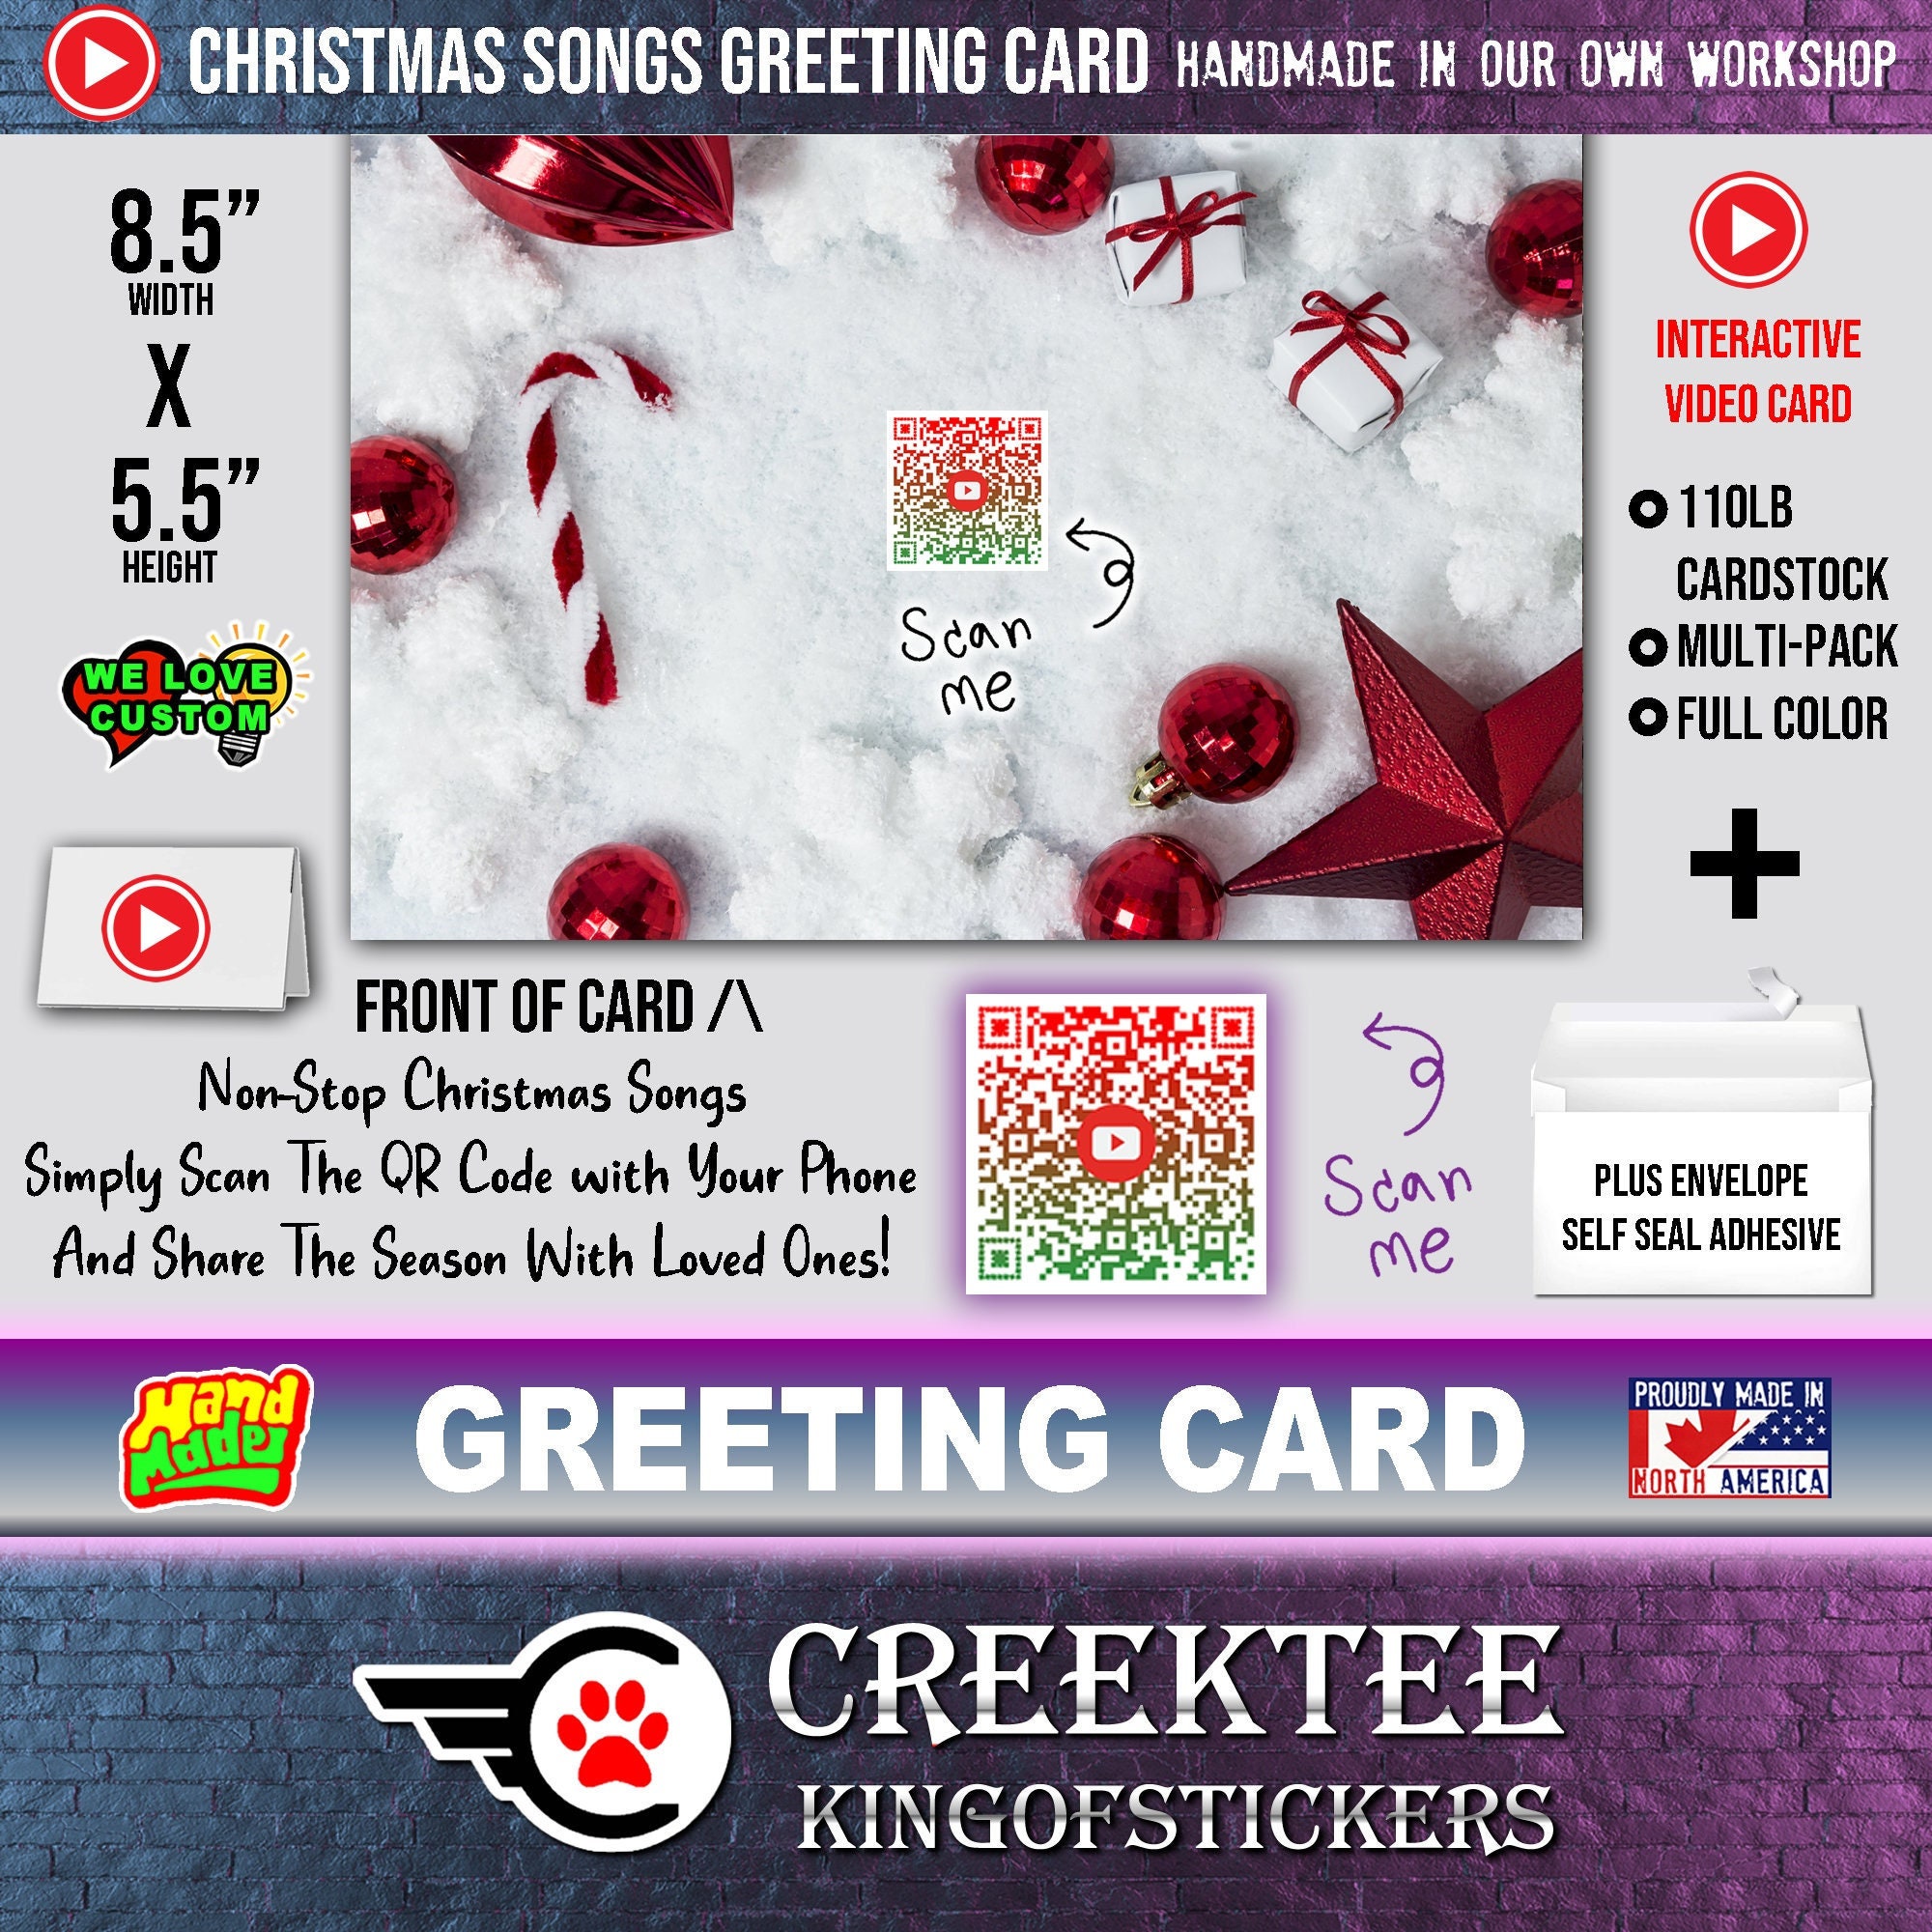 QR Code Audio Christmas Greeting Cards Come To Life. 5.5 inch high x 8.5 inch wide 110lb cardstock hand made full color print. Customizable